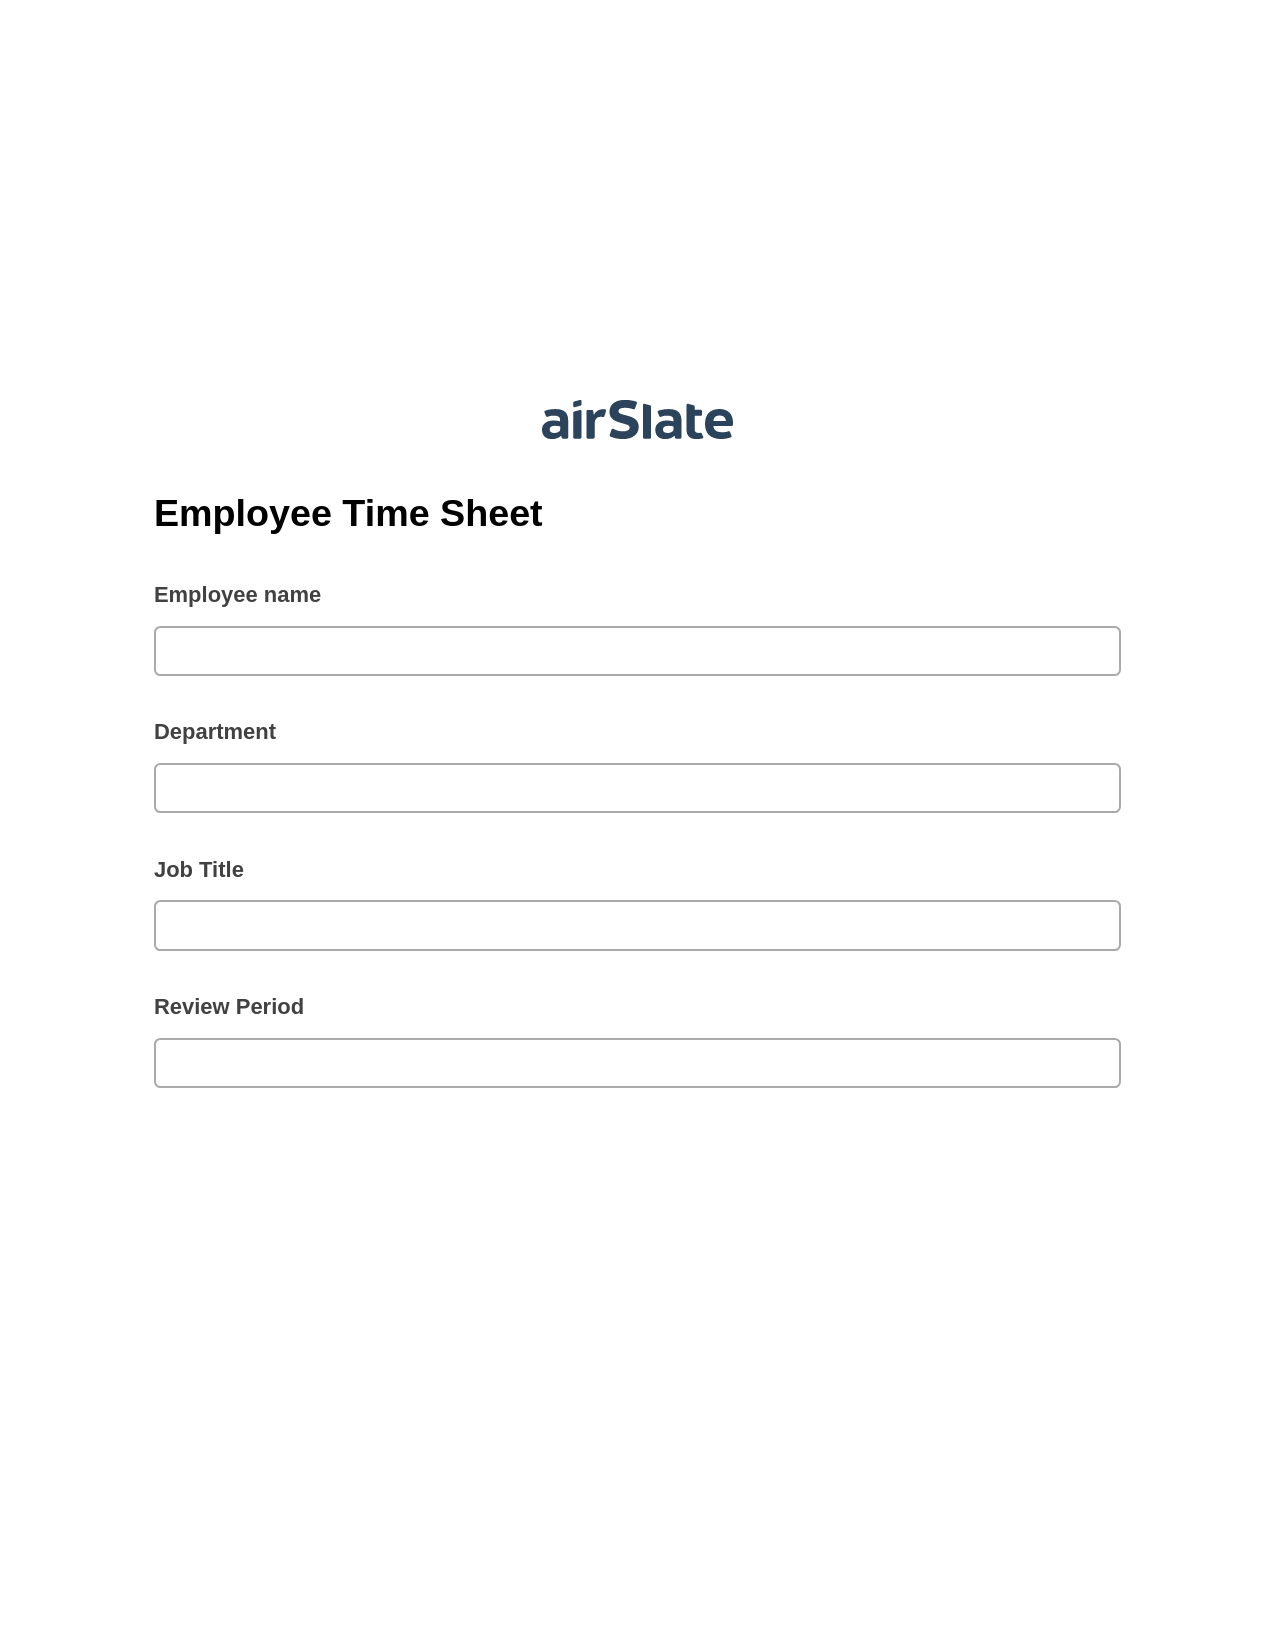 Employee Time Sheet Pre-fill from MySQL Bot, Update Audit Trail Bot, Export to Excel 365 Bot